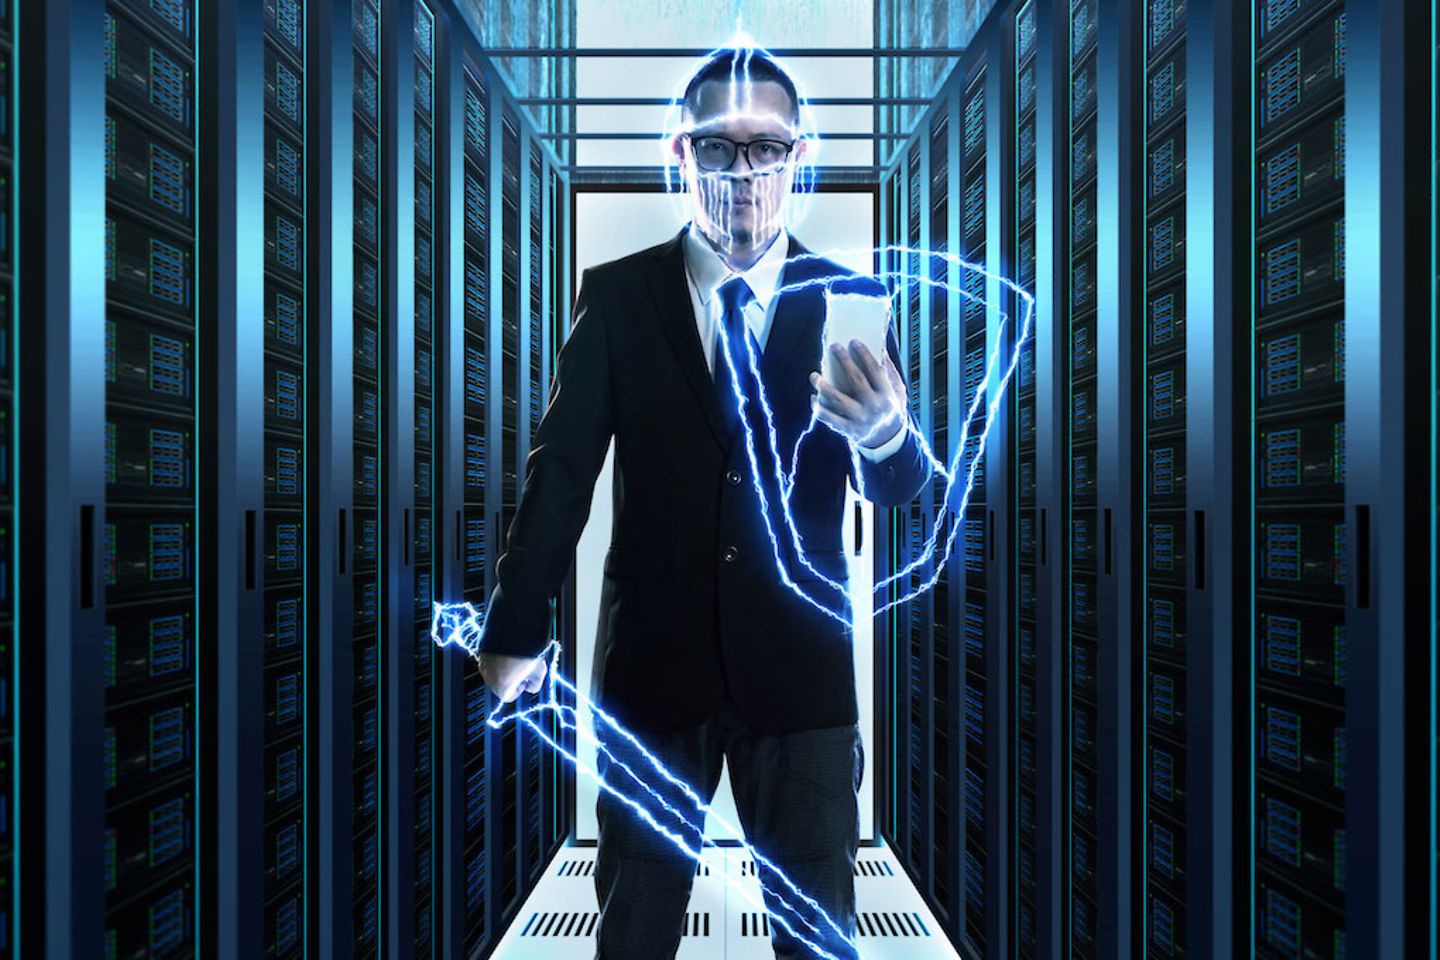 Protection, precaution, and security in business big data technology